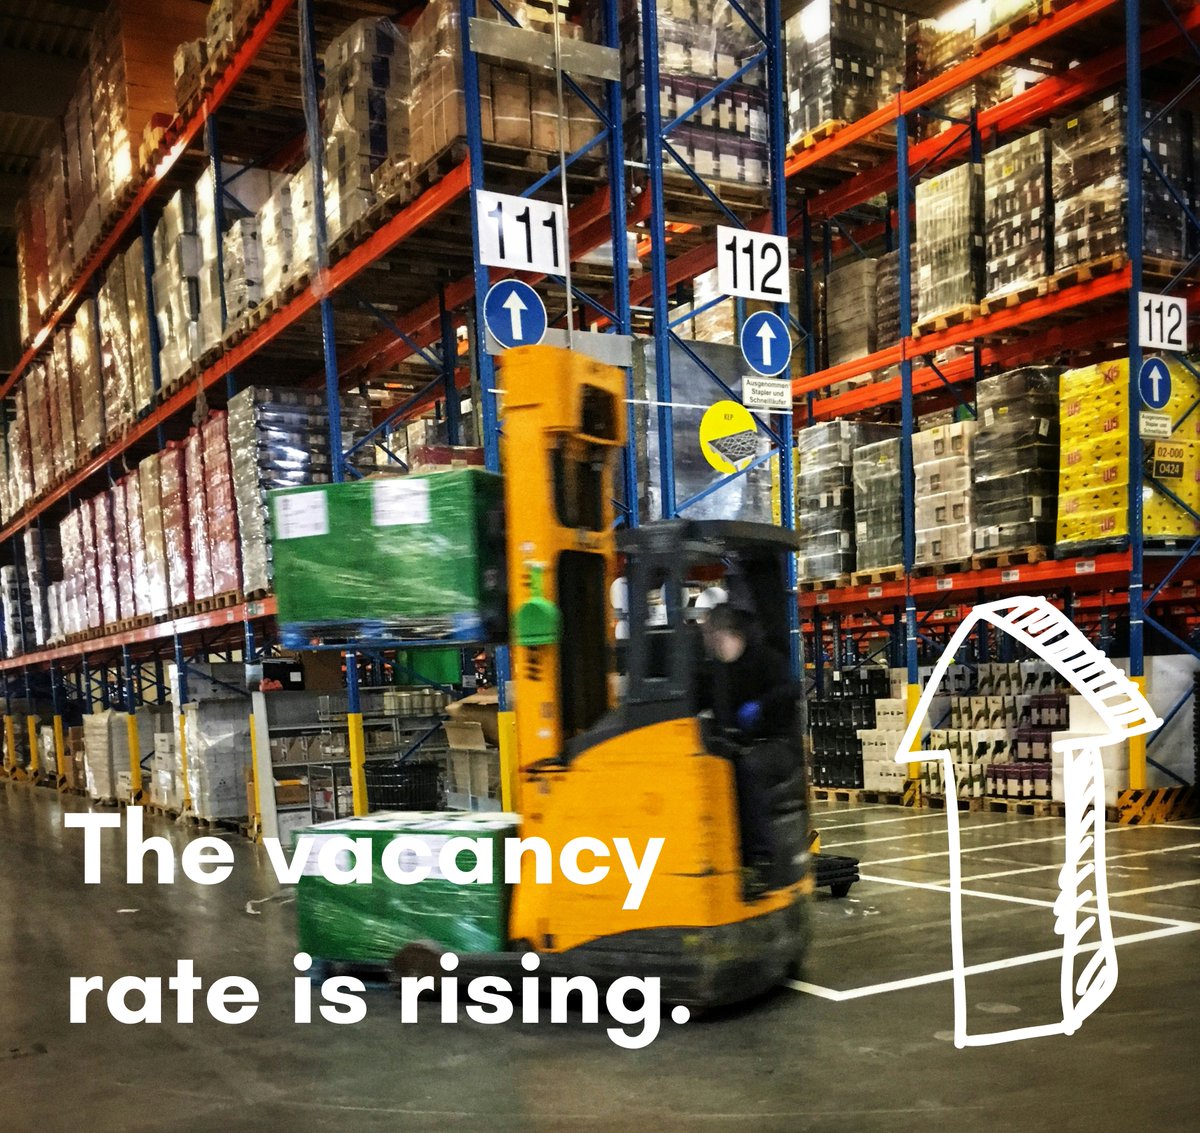 🏭📉 Warehouse rents are showing signs of stabilization and even a slight decrease in some areas, according to Taylor Wood from Savills. The average warehouse vacancy rate in the U.S. has risen to 5.8% from 3% in late 2022. #WarehouseRent #RealEstate #MarketTrends